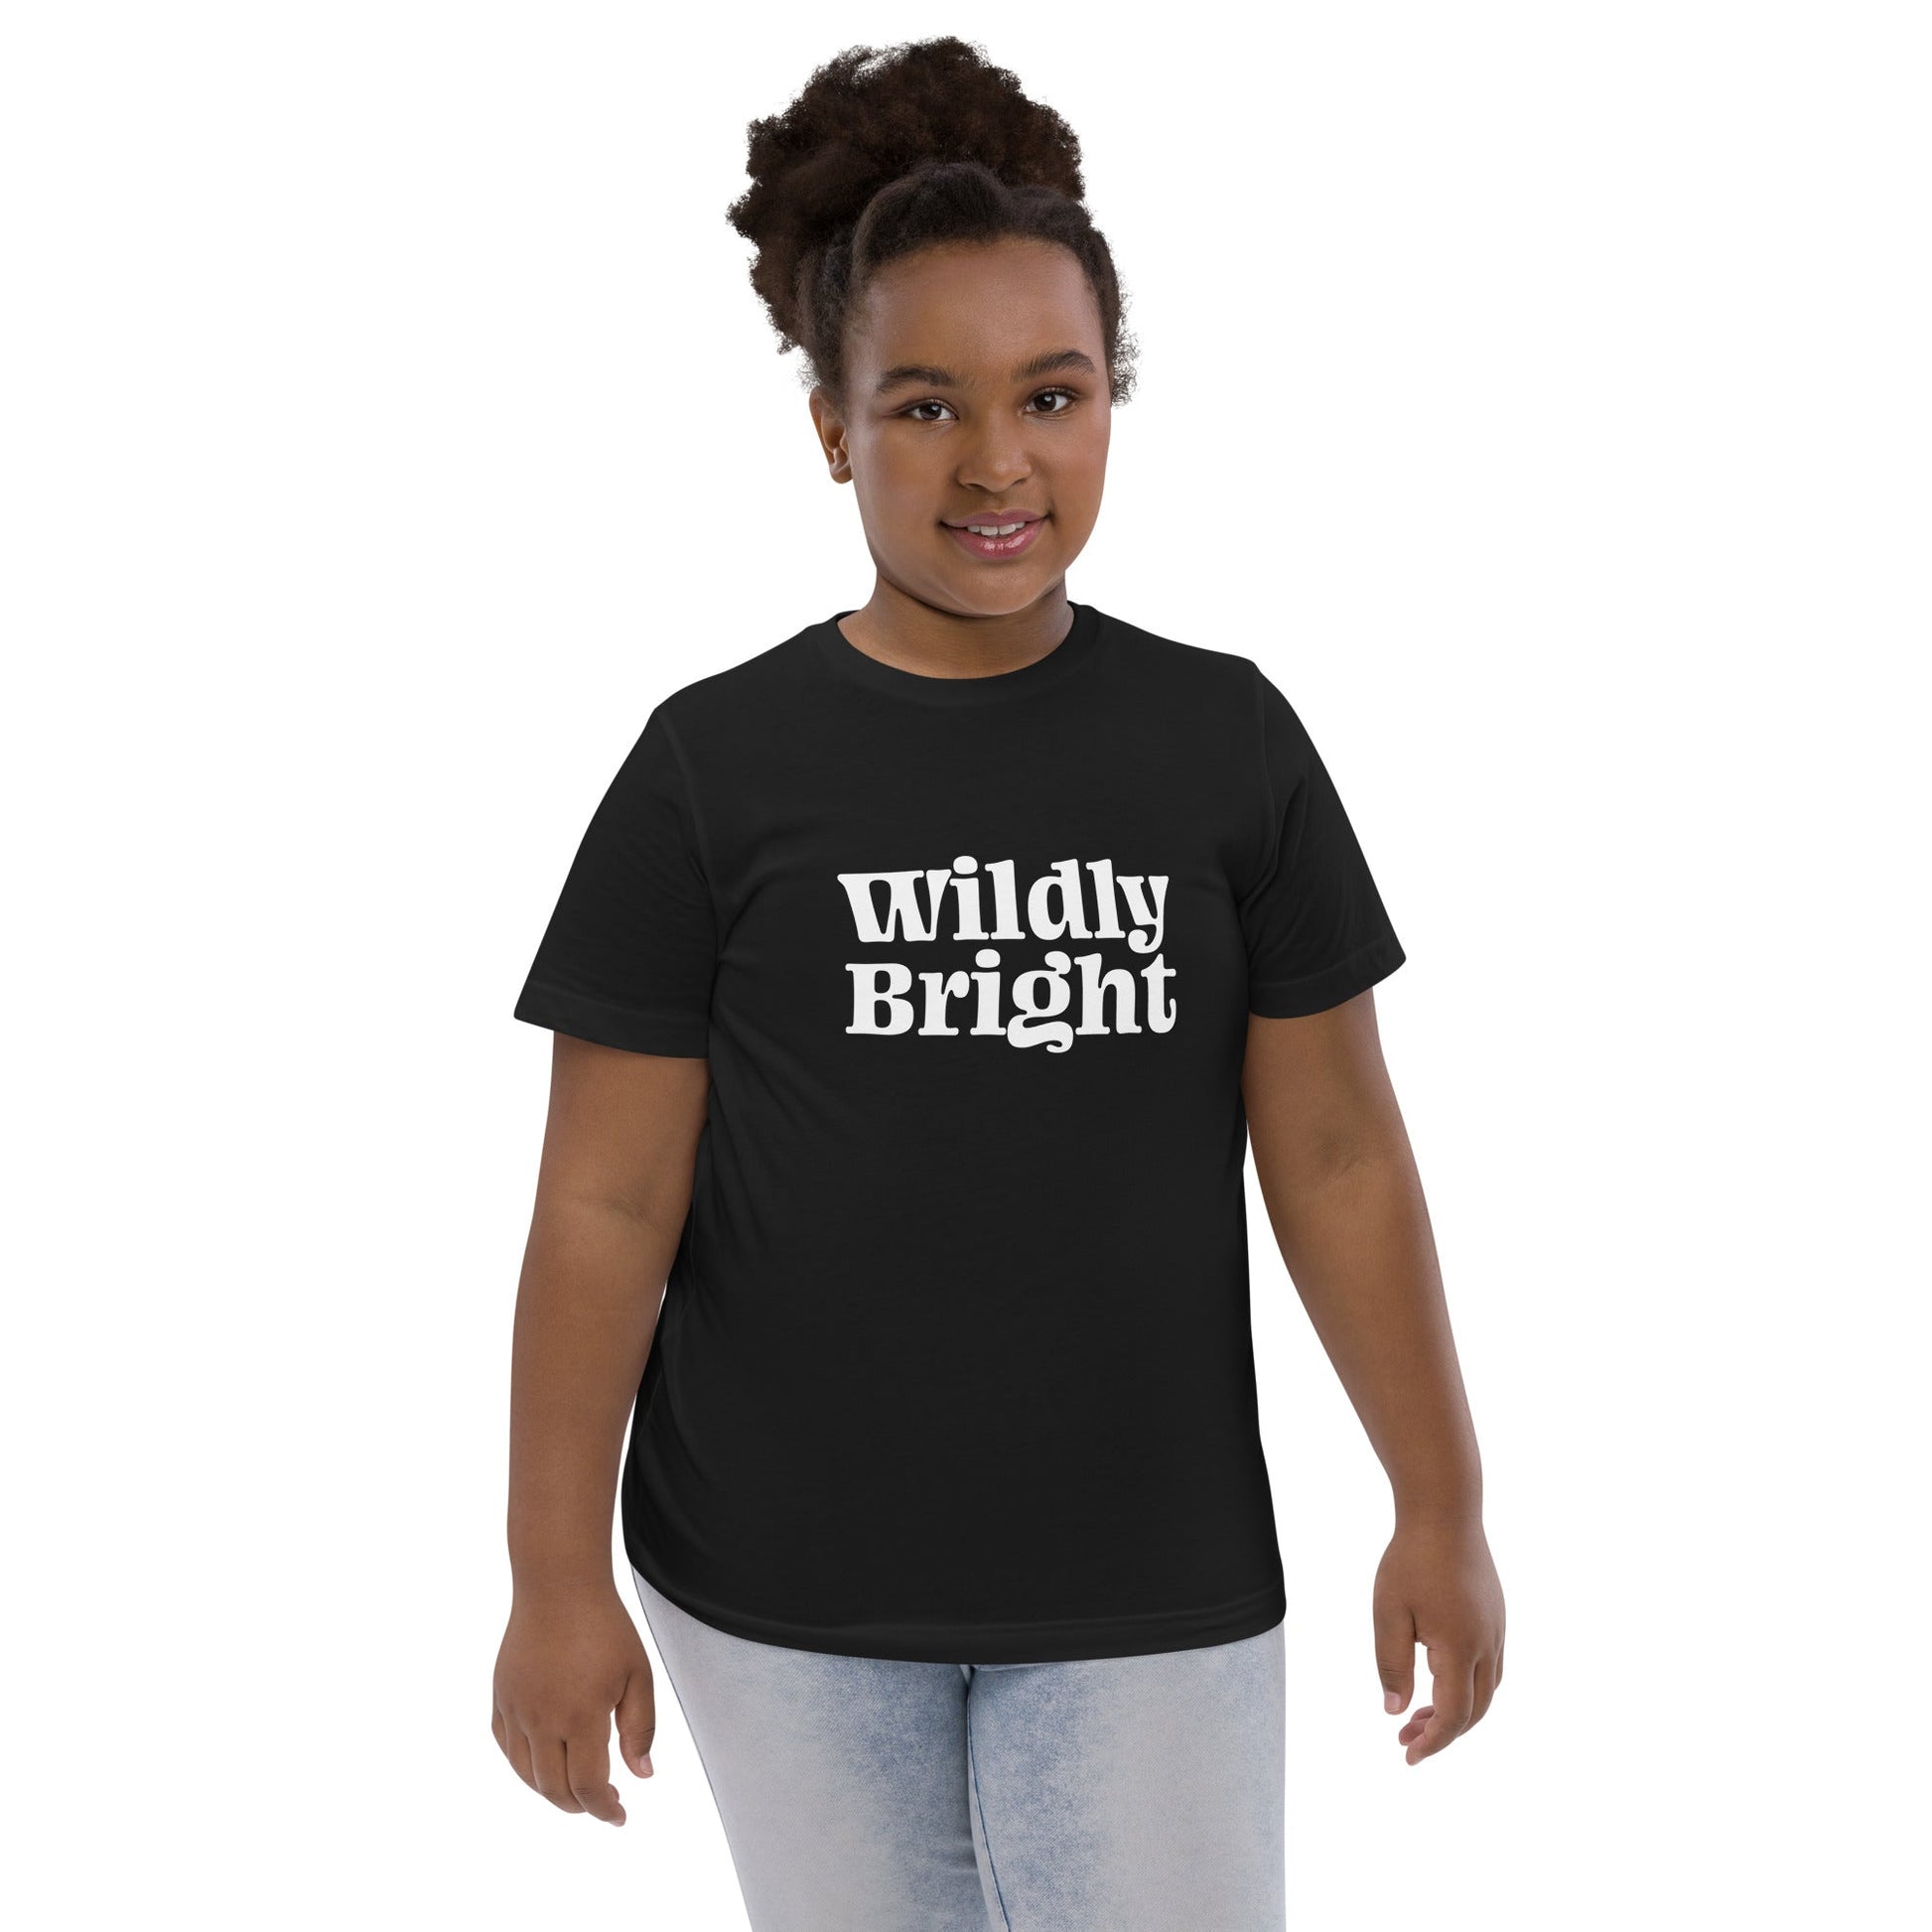 Wildly Bright 🔥 Kids T-Shirt T-Shirt from Wildly Bright